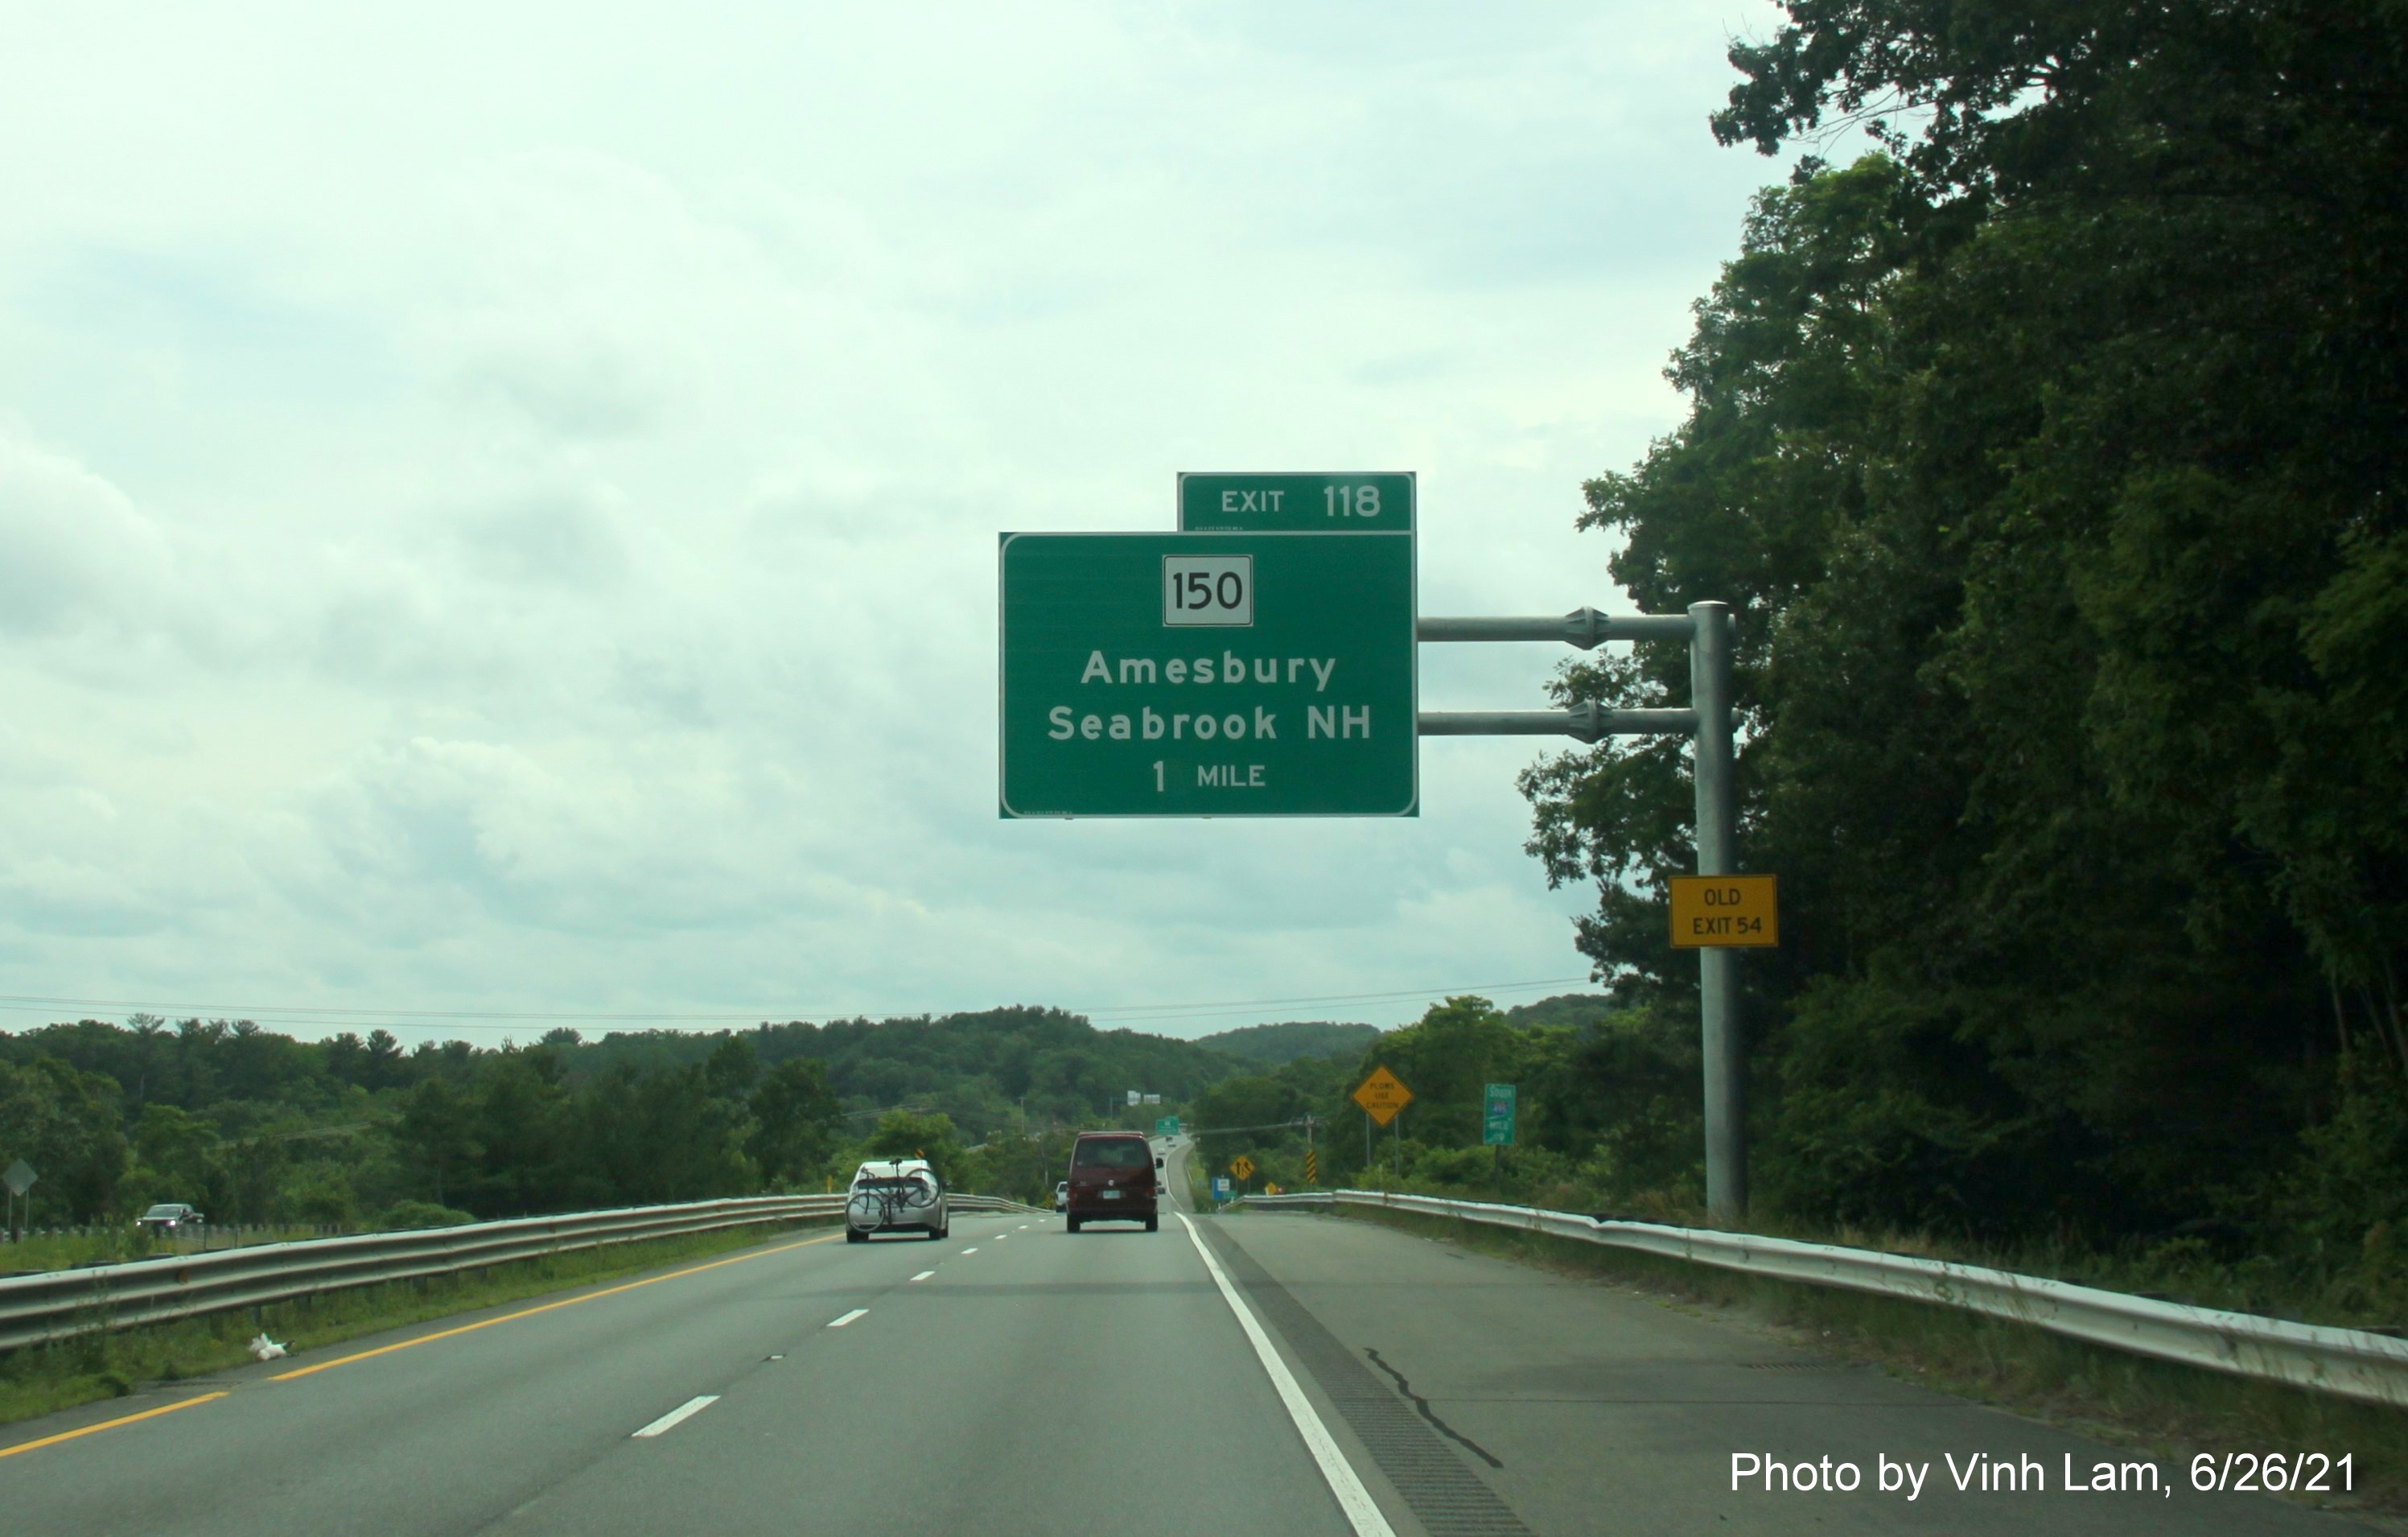 Image of 1 mile advance overhead sign for MA 150 exit with new milepost based exit number and yellow Old Exit 54 sign on support on I-495 South in Amesbury, photo bt Vinh Lam, June 2021